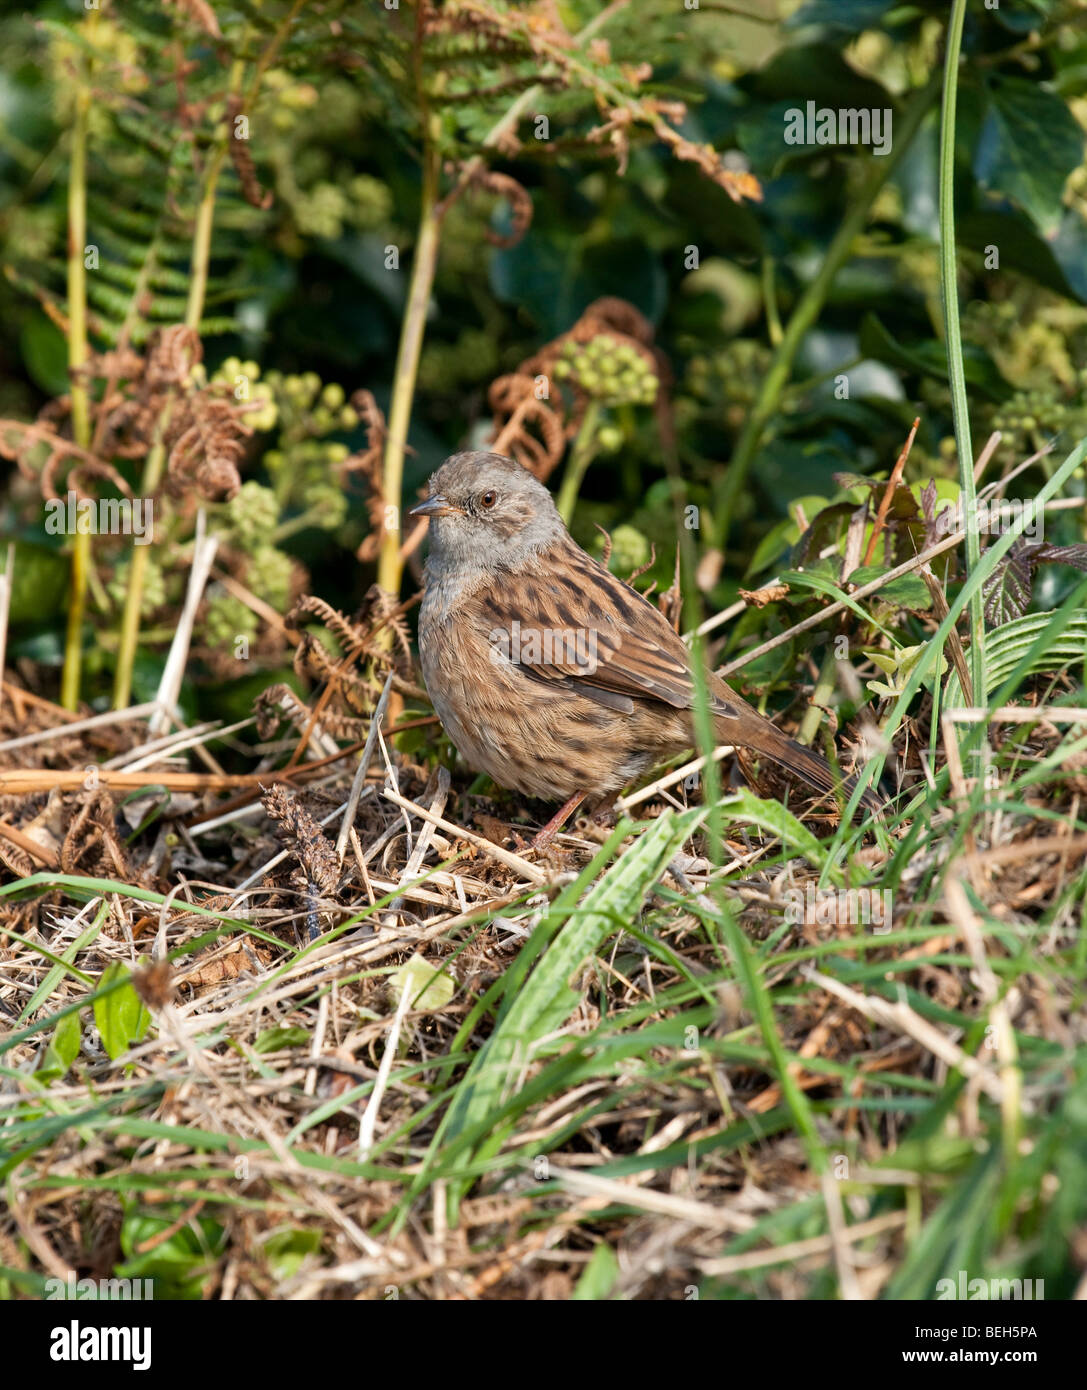 Dunnock, (Hedge sparrow, Hedge Accentor), Prunella modularis, sulle isole Scilly Foto Stock